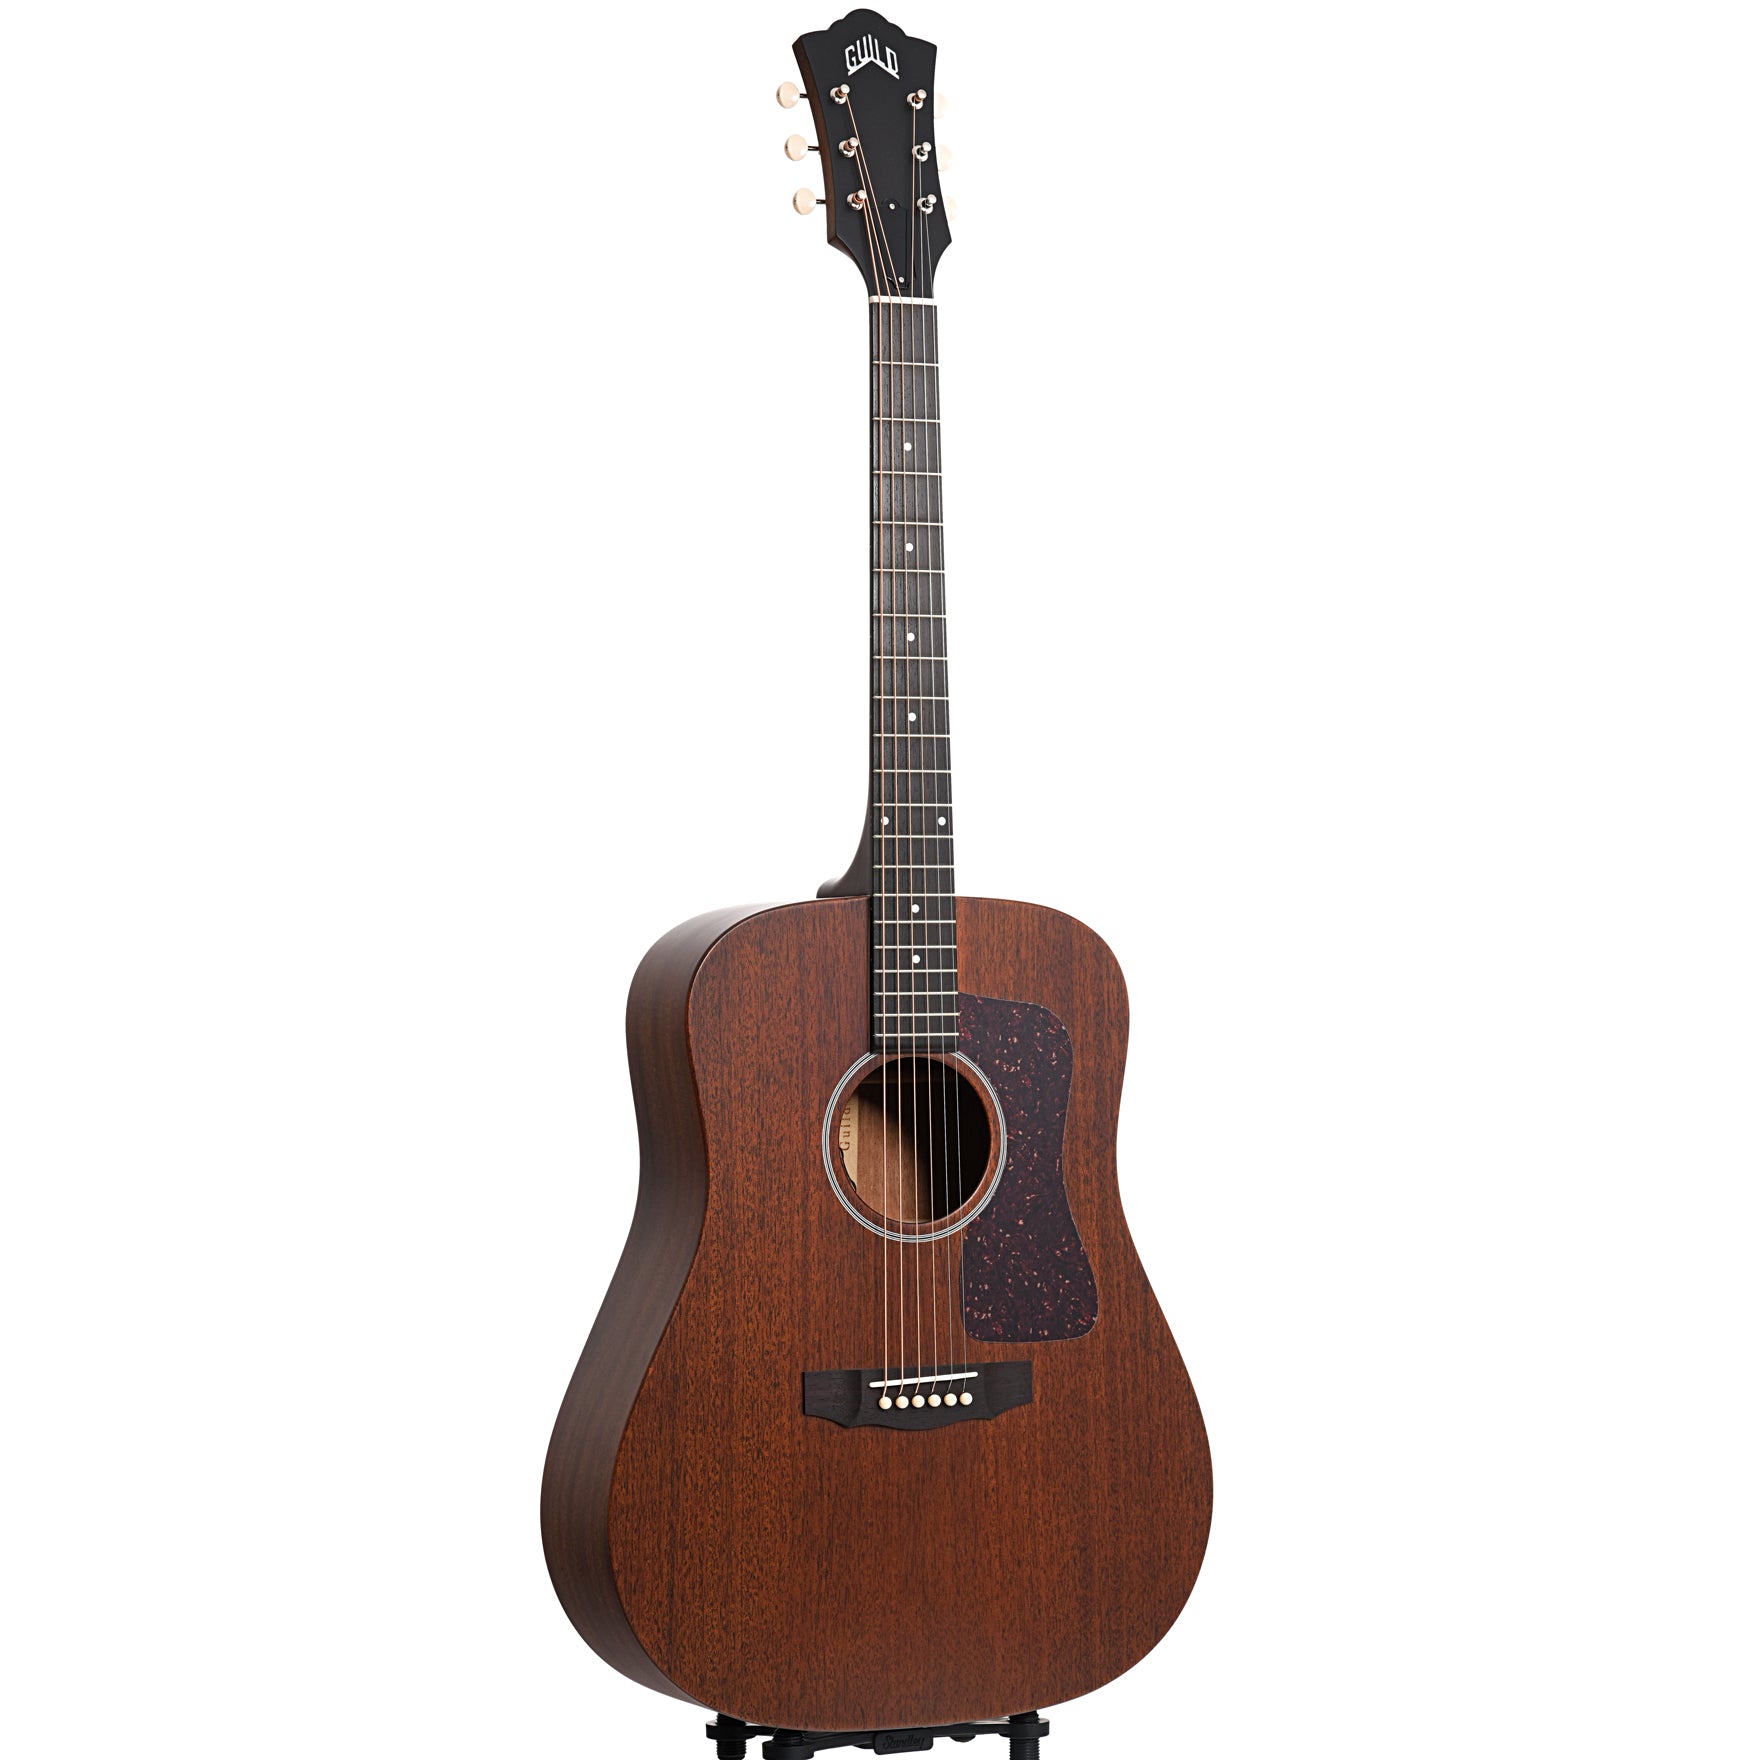 Image 3 of Guild USA D-20E Acoustic Guitar with Pickup & Case - SKU# GUID20E : Product Type Flat-top Guitars : Elderly Instruments